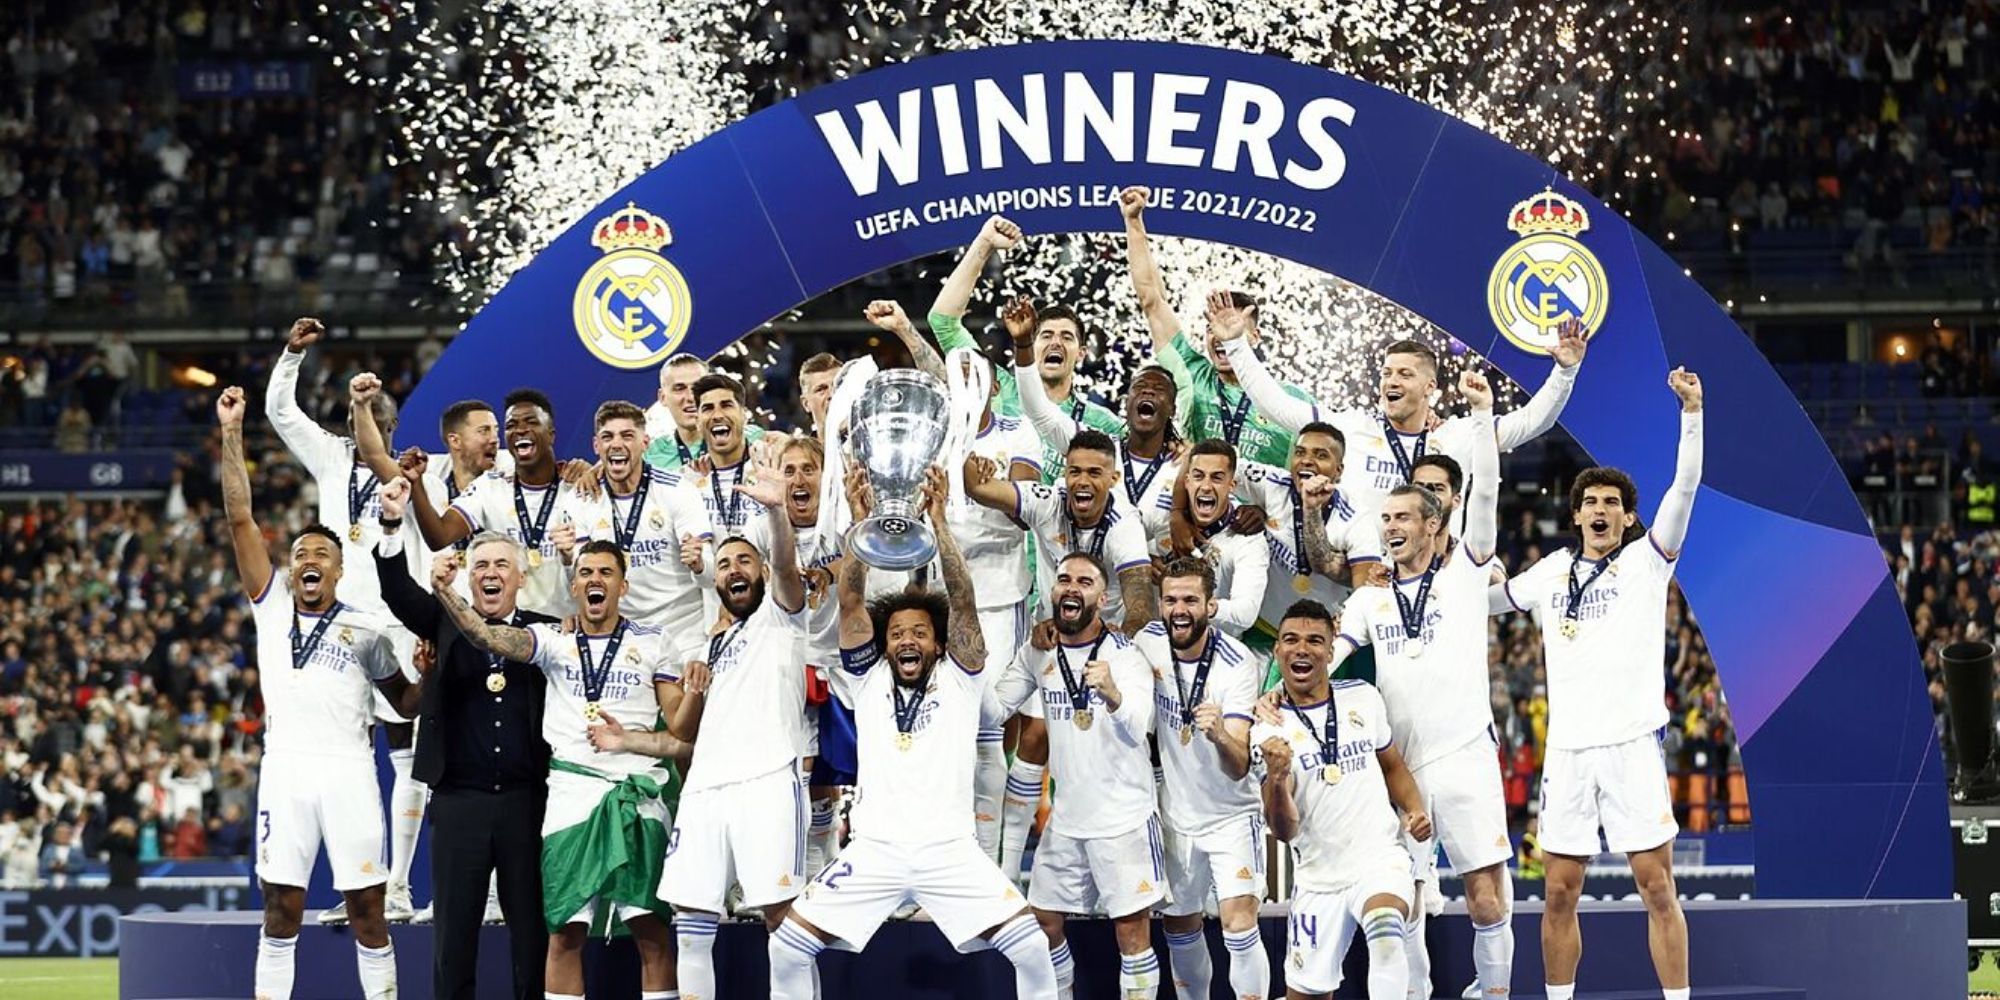 Real Madrid have won more Champions League trophies than any other club